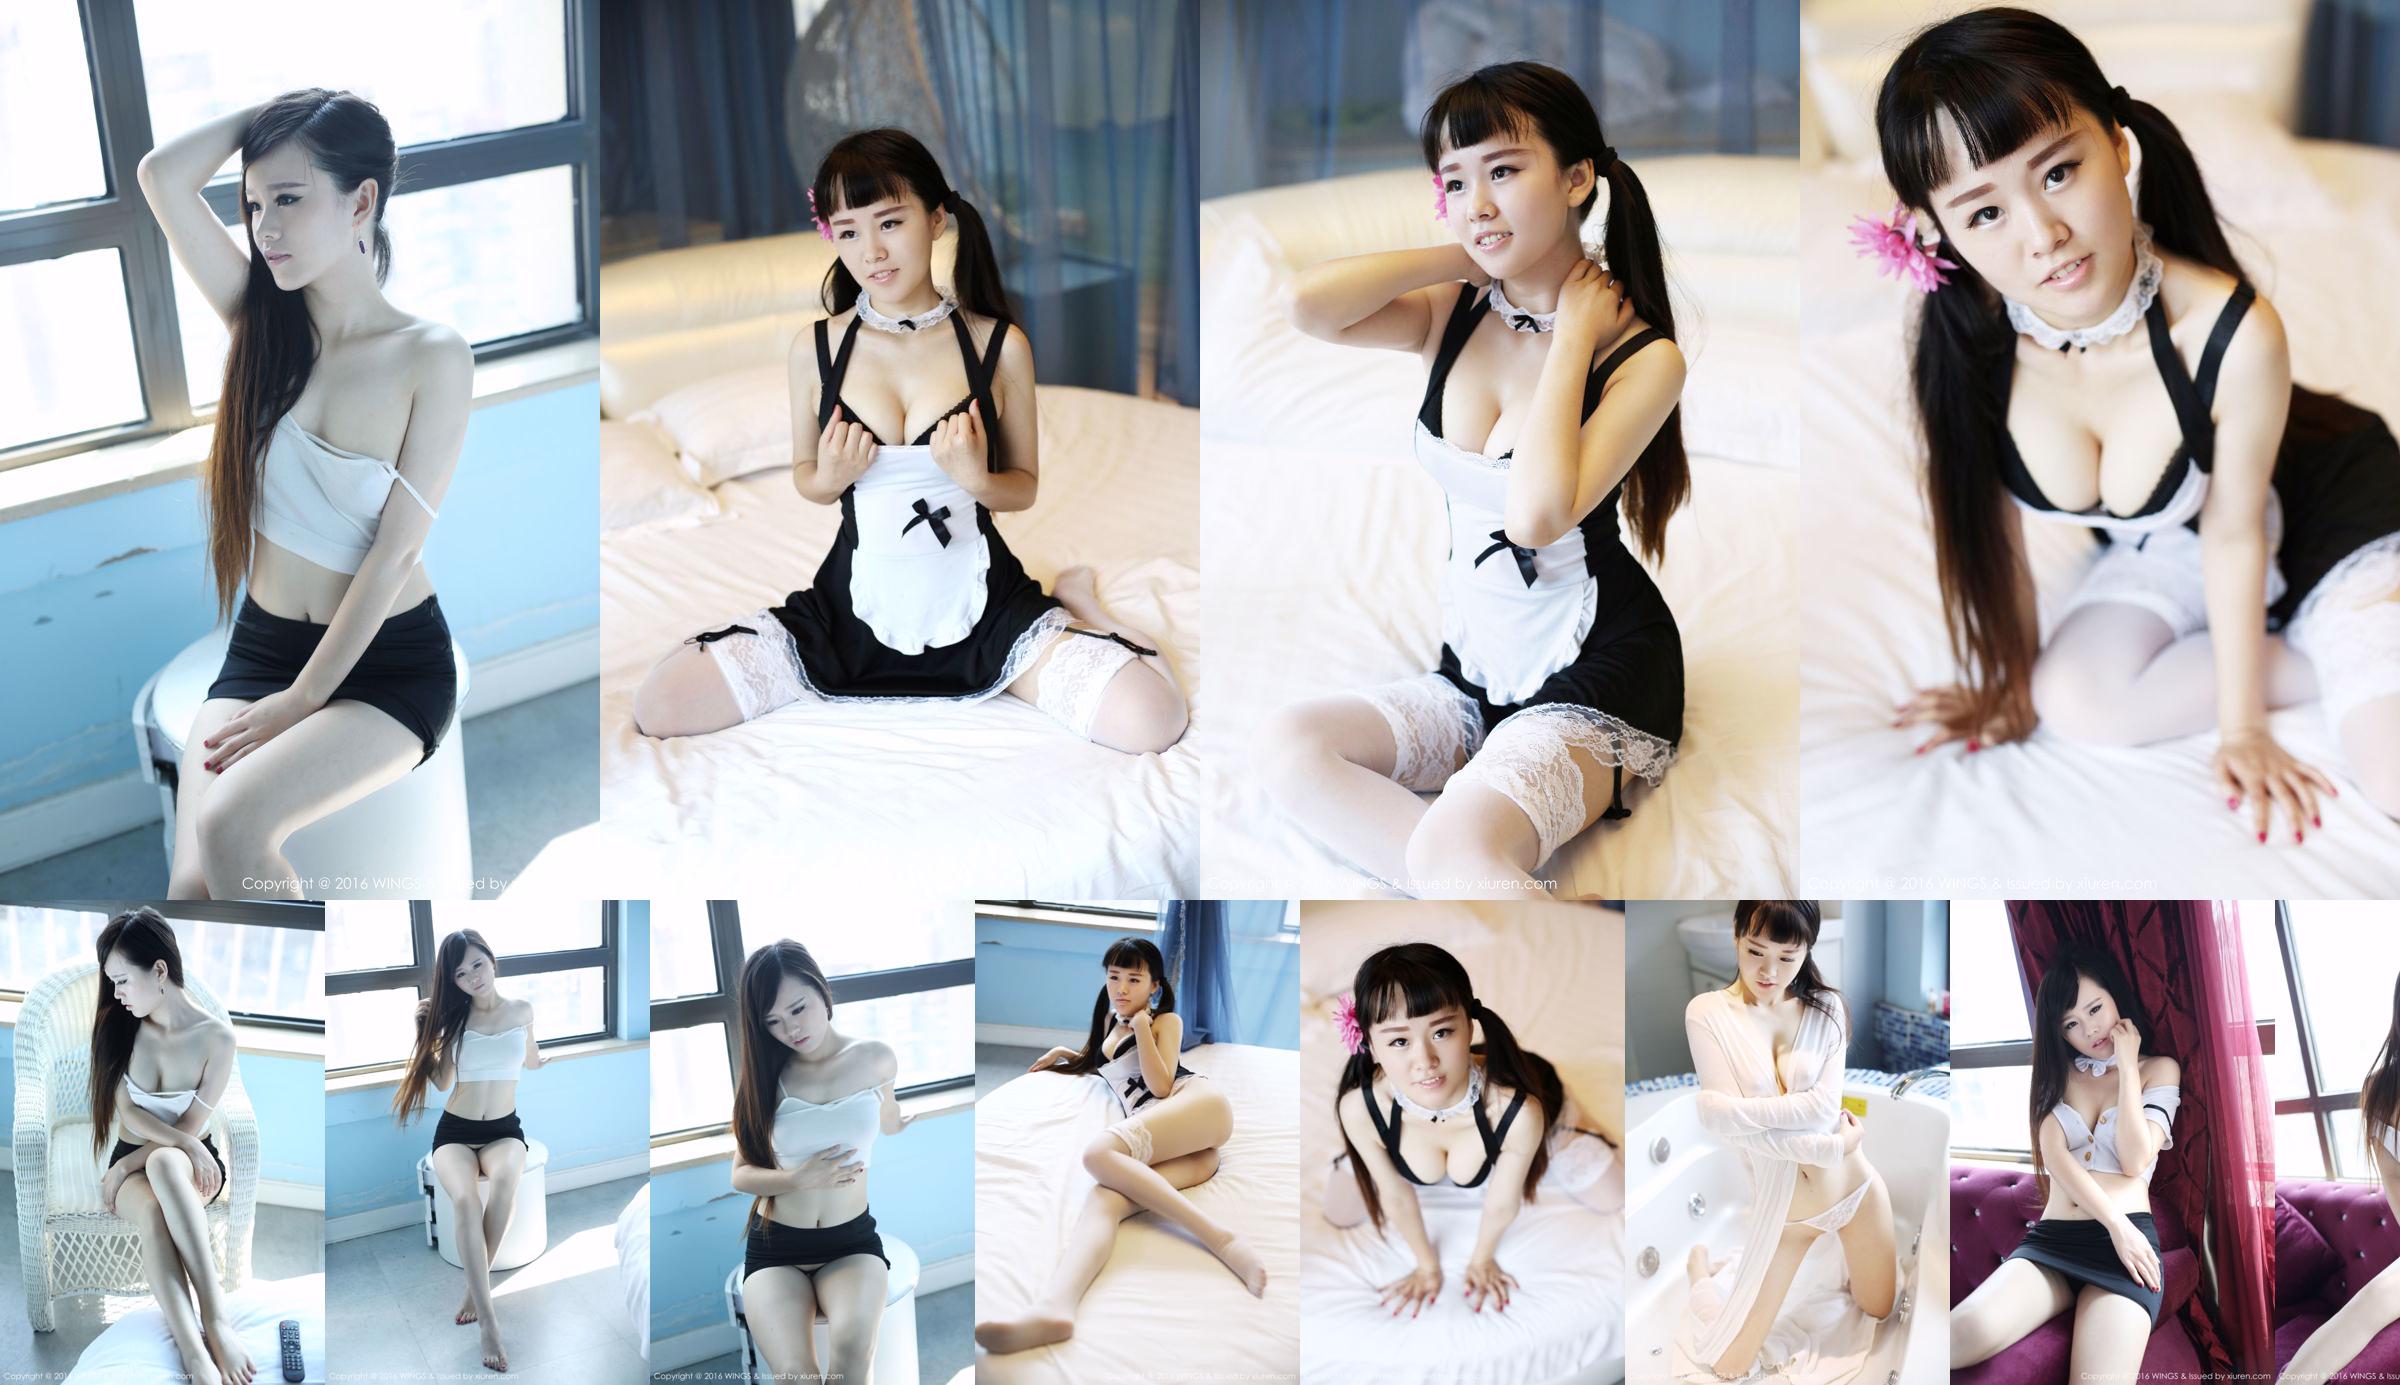 Meow Meow Cyan "Uniform Temptation Welfare" [WingS影私荟] Vol.008 No.300938 Page 24